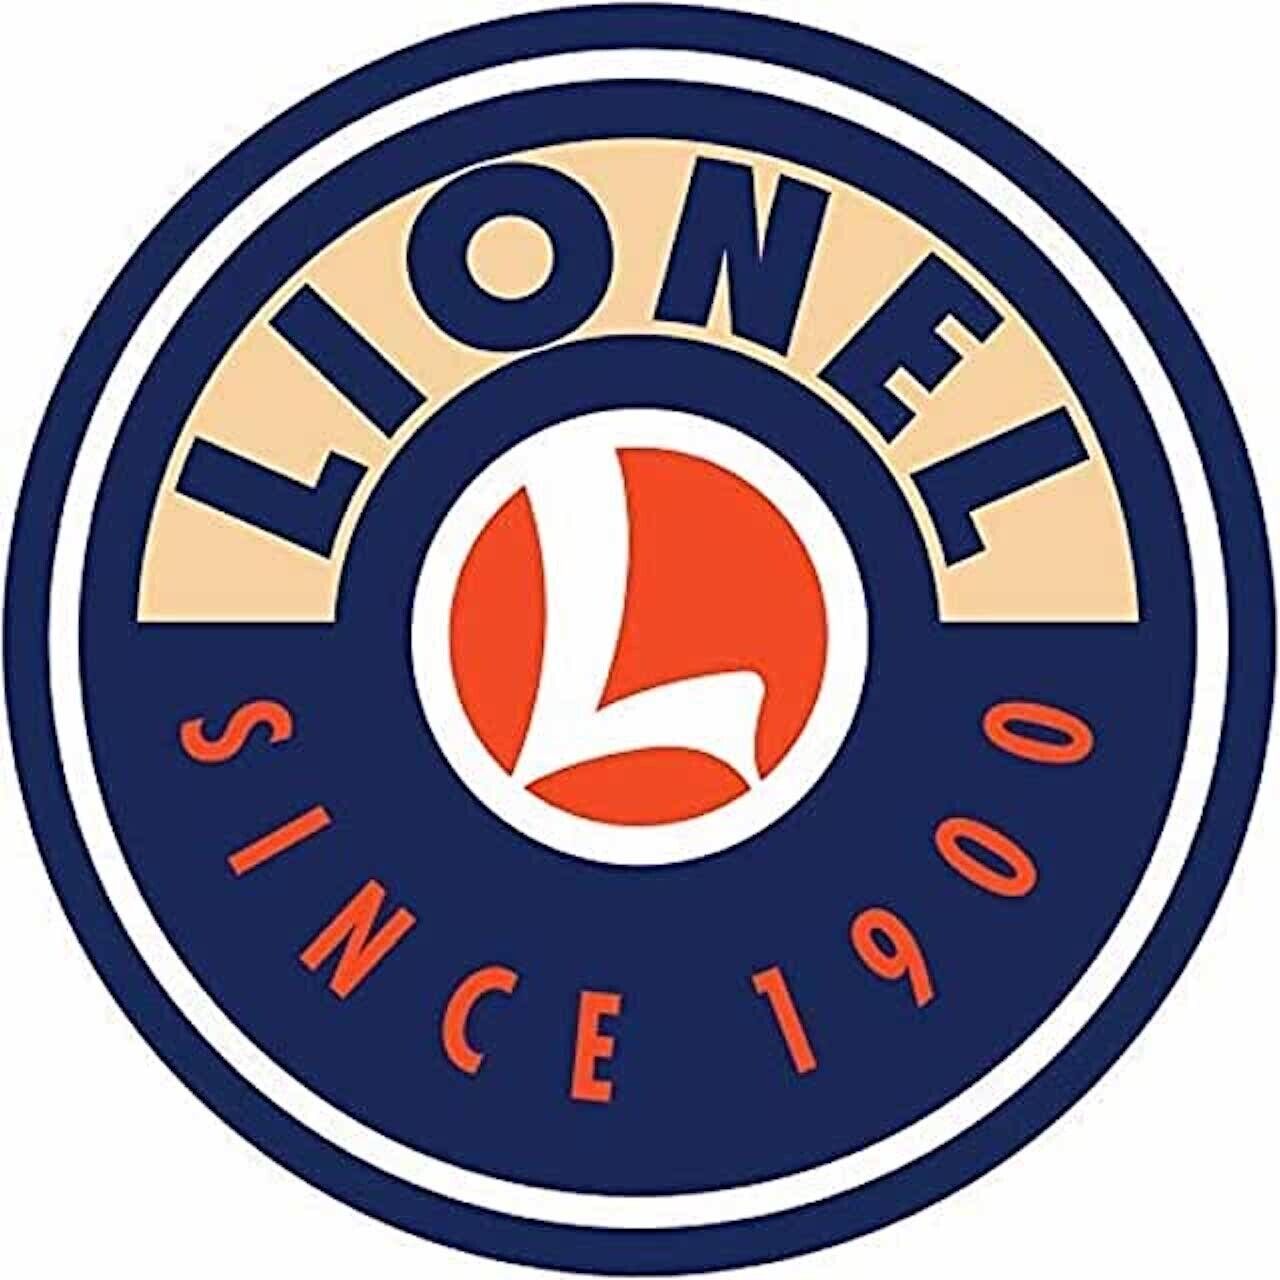 LIONEL TRAINS TIN SIGN SINCE 1900 ROUND 11.75 INCH SIGN LOCOMOTIVE WHISTLE HO